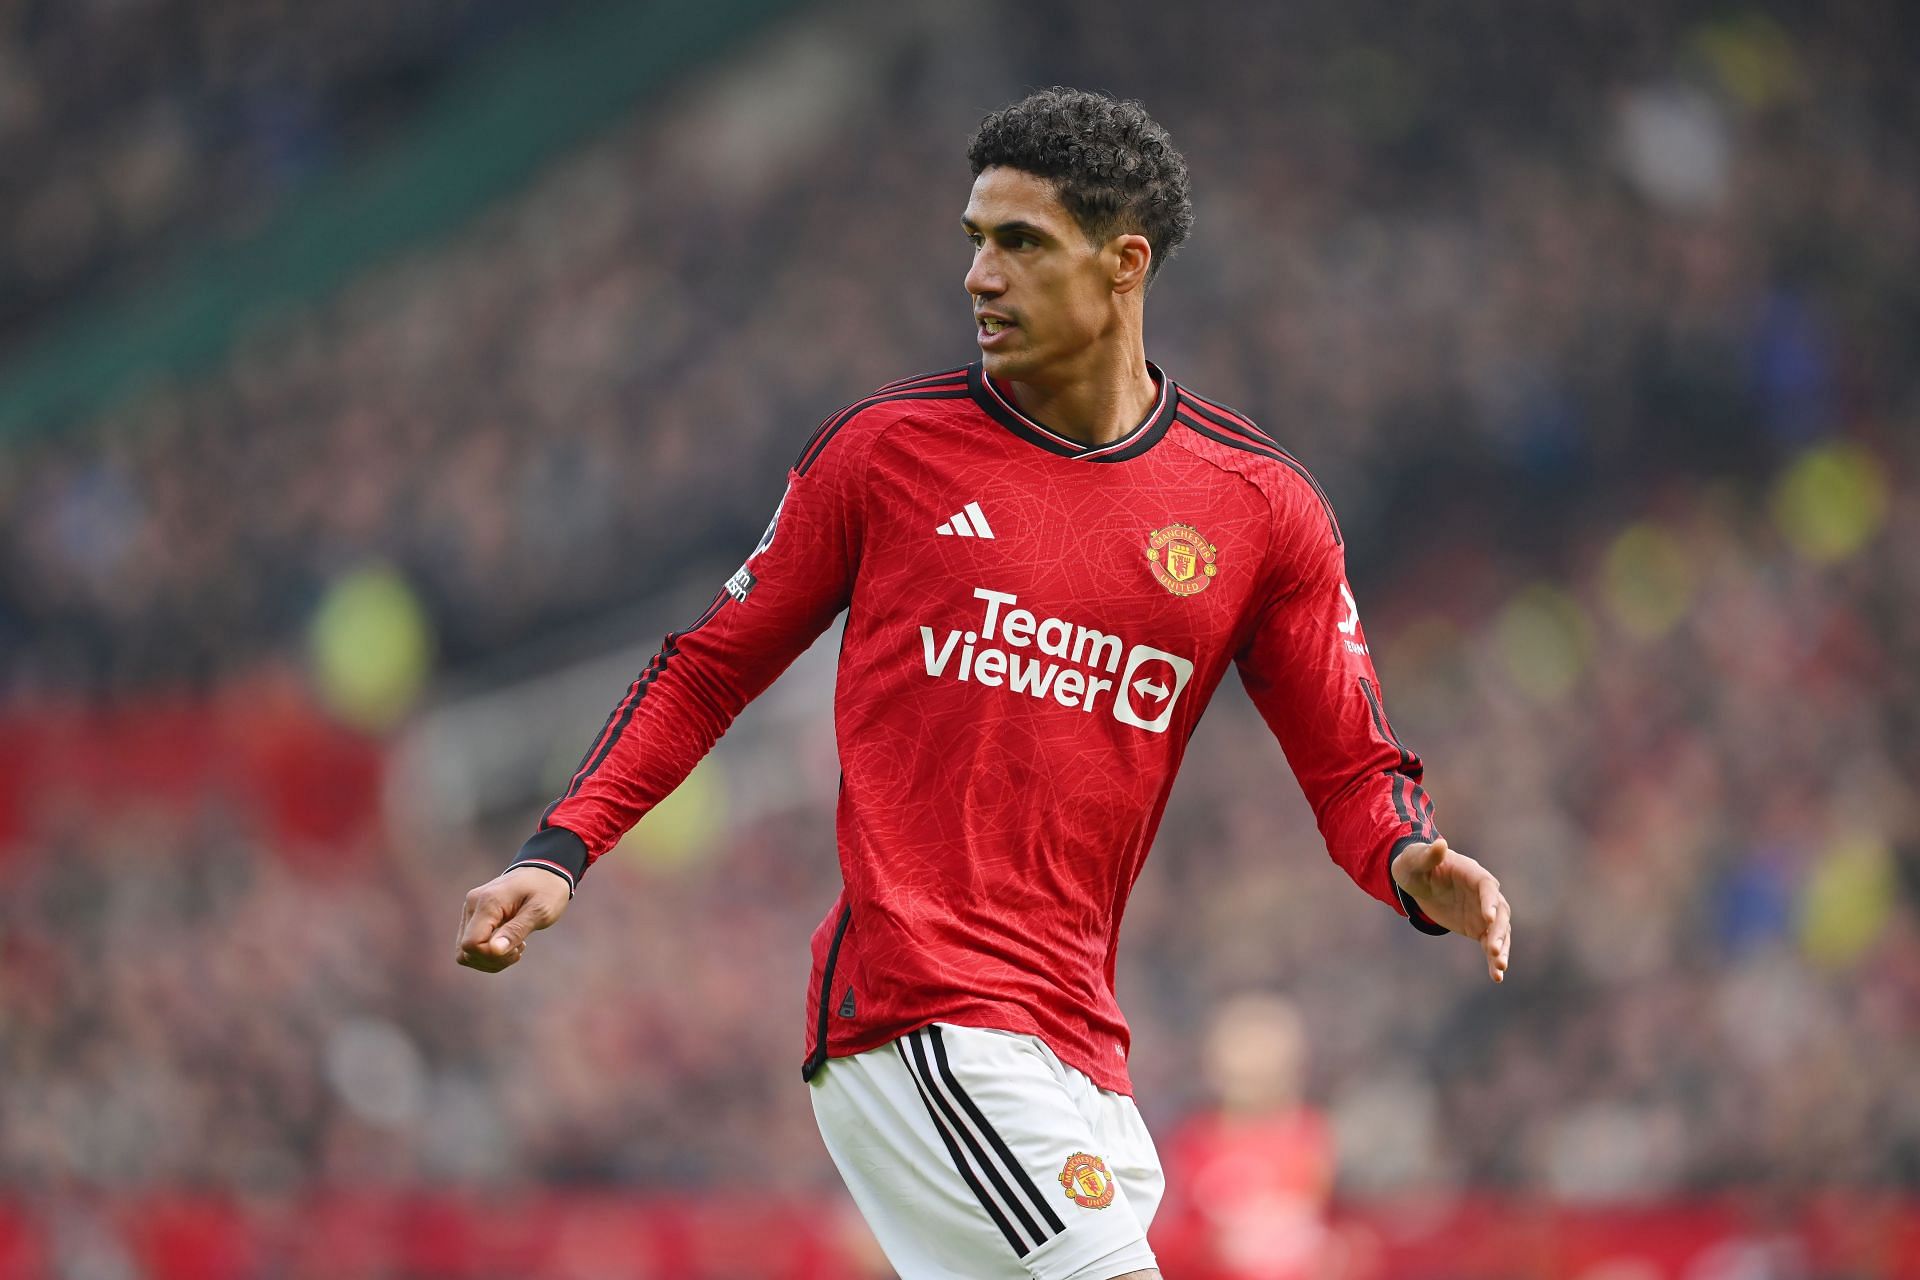 Raphael Varane's time at Old Trafford could be coming to an end